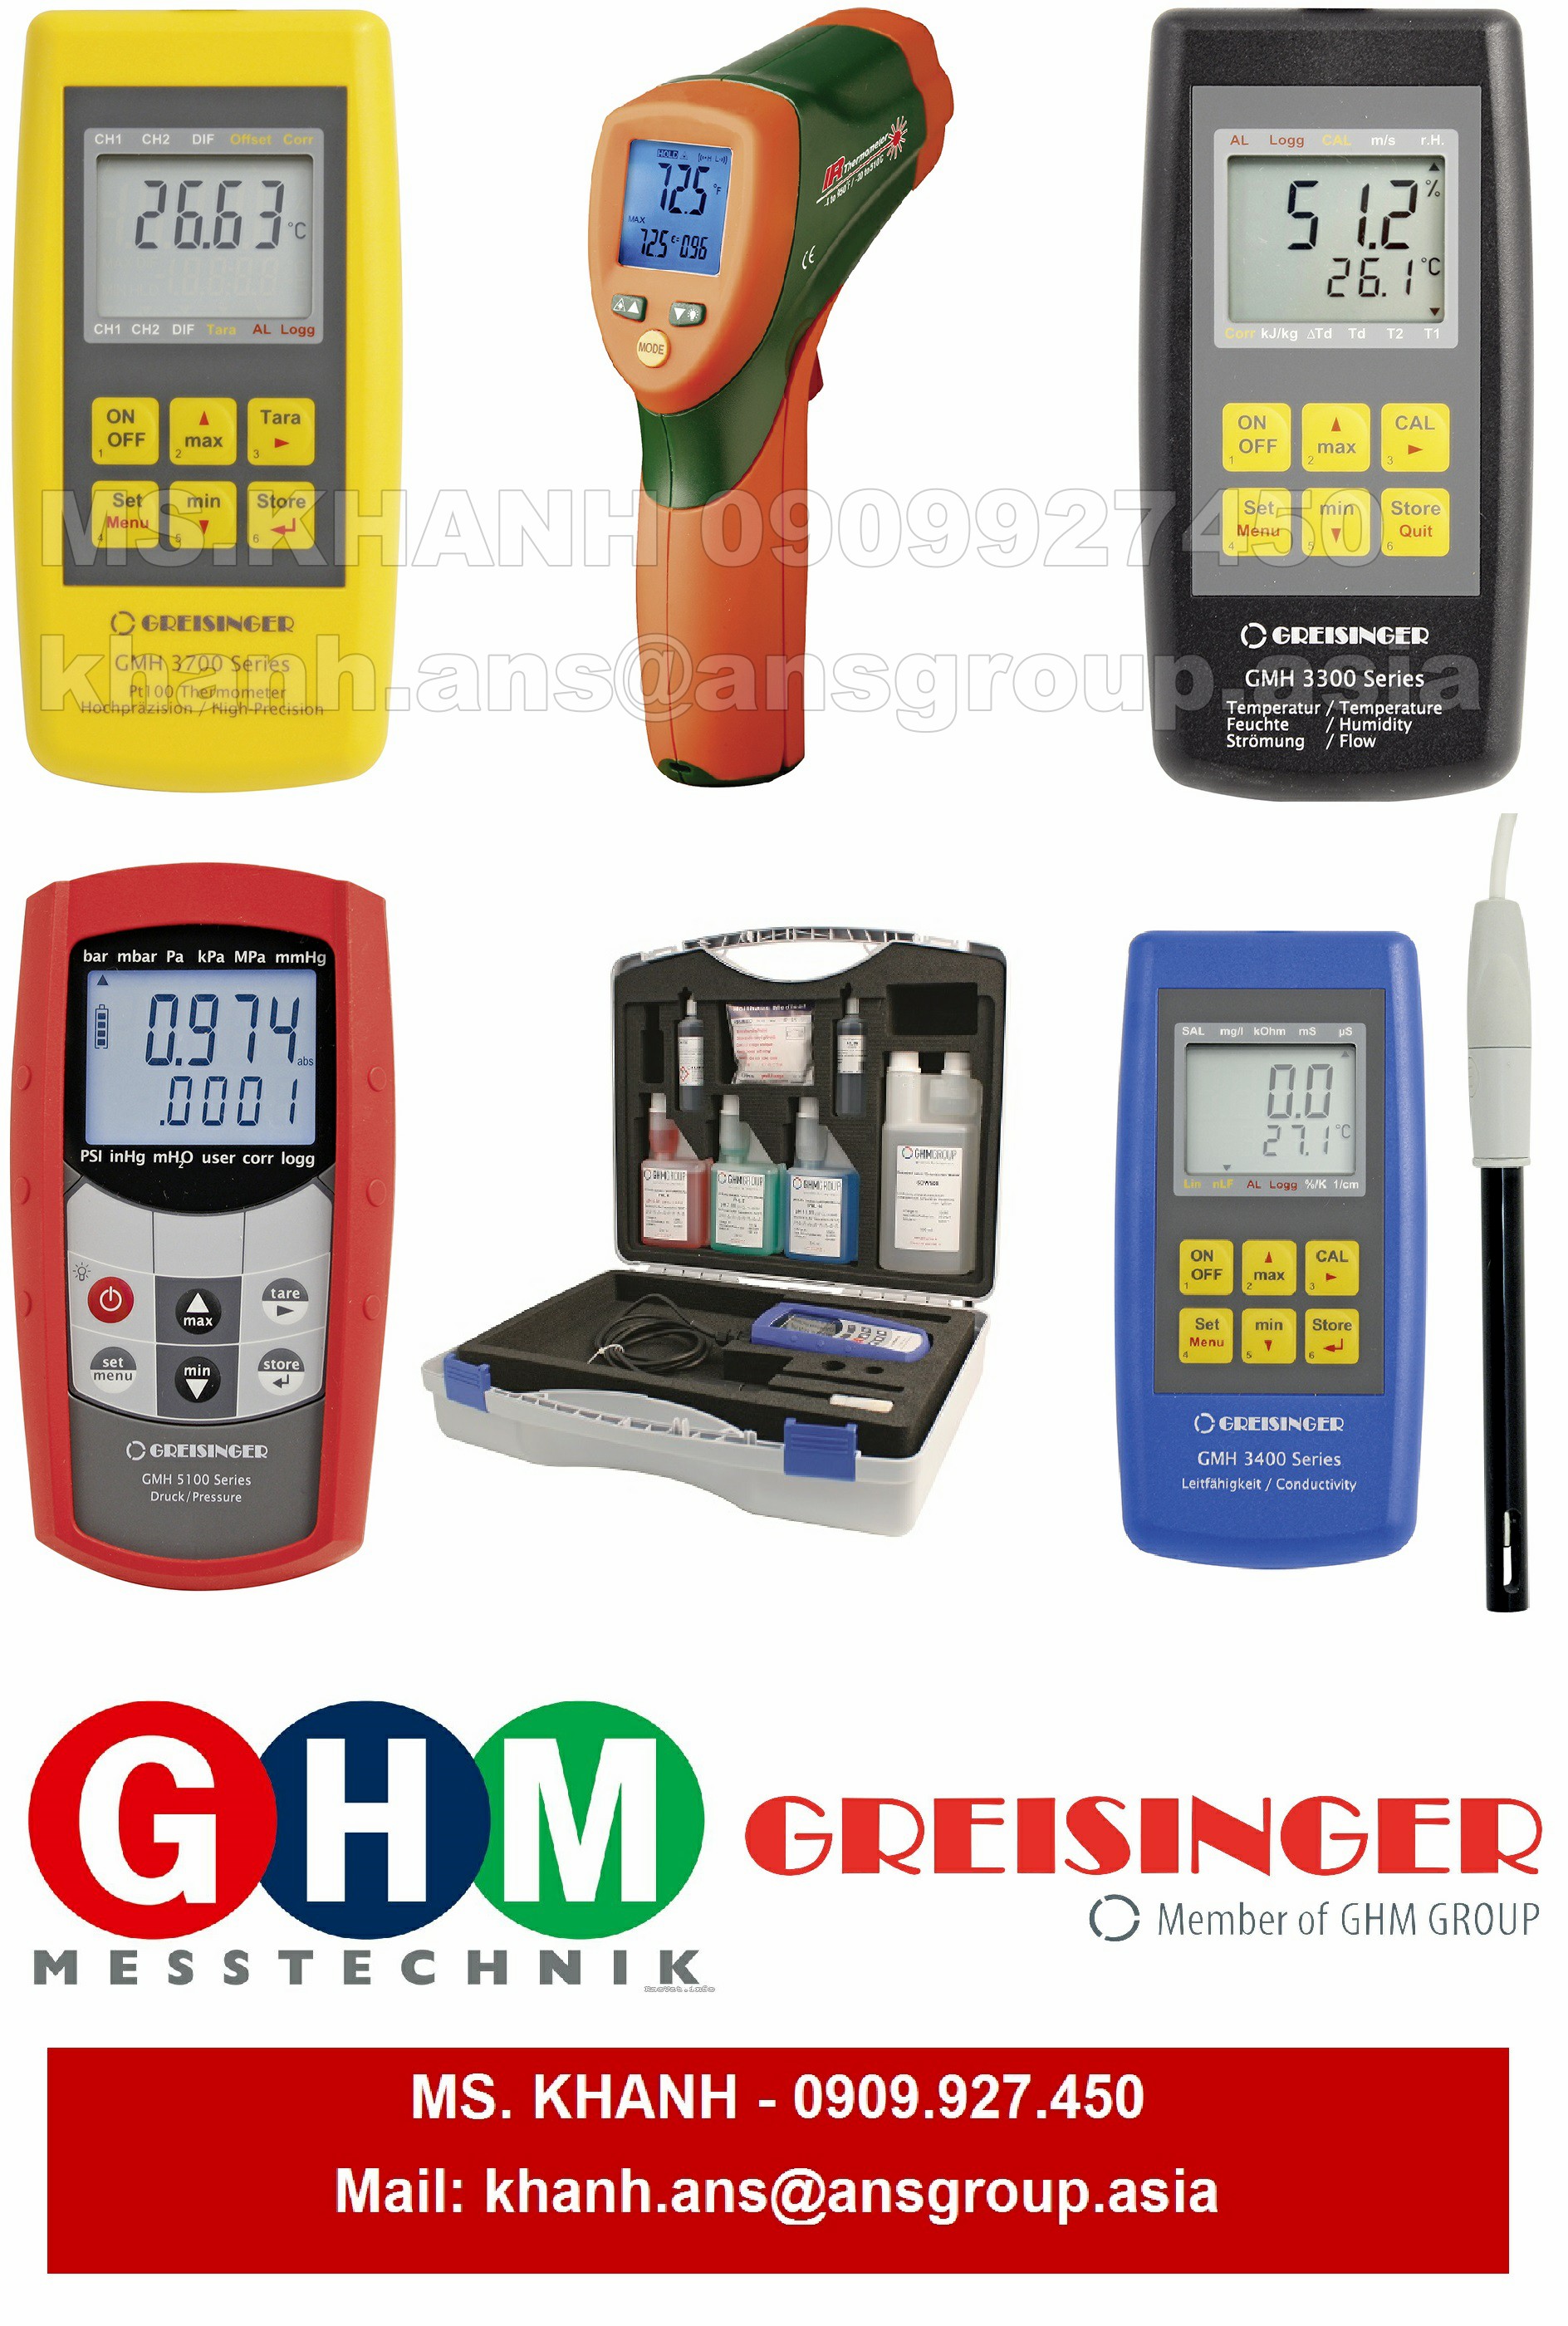 may-do-nhiet-do-gmh3710-set1-pt100-4-wire-high-precision-thermometer-greisinger-ghm-vietnam.png